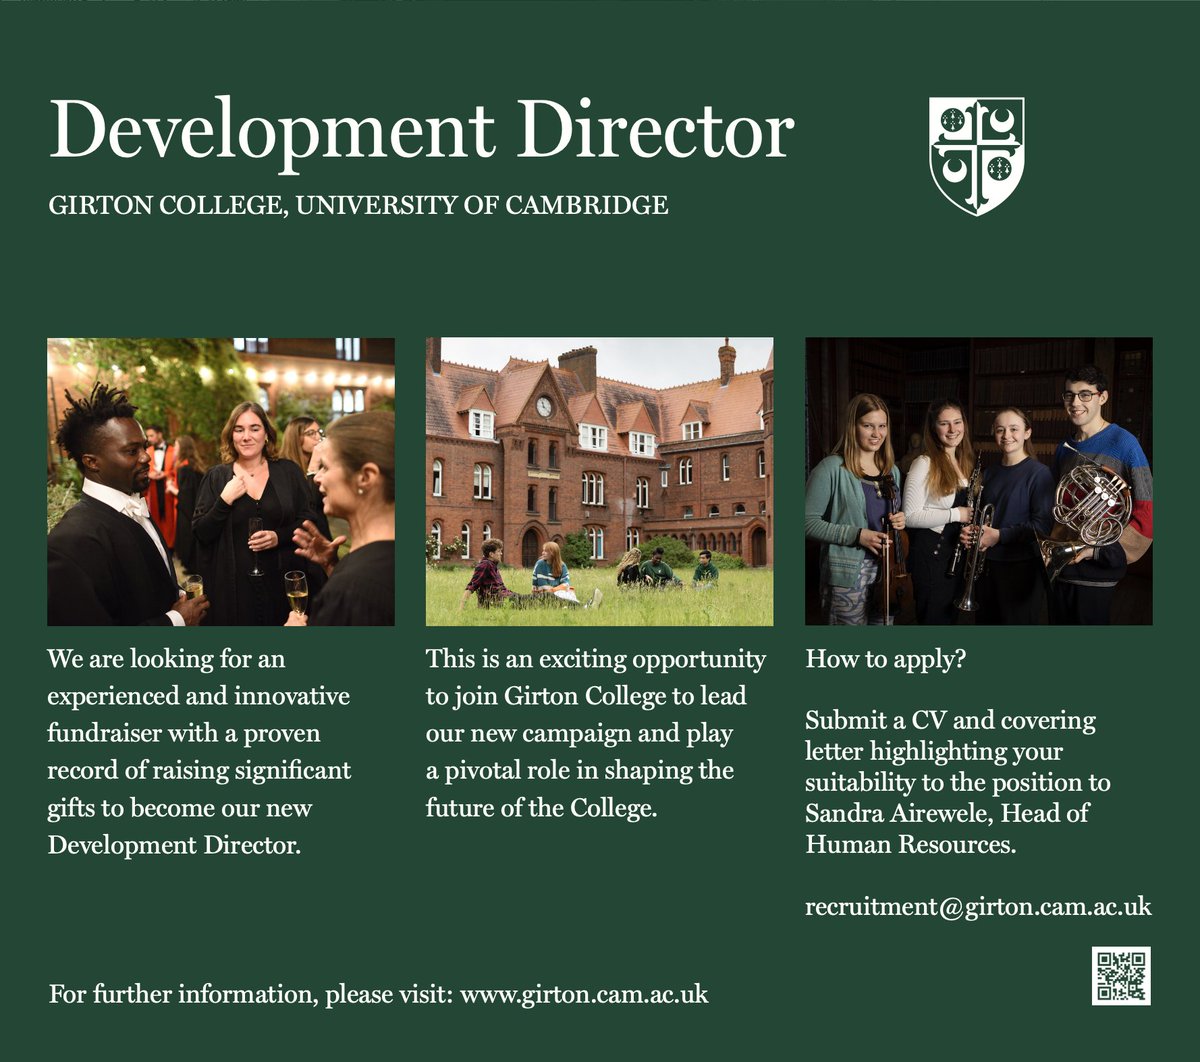 Are you an innovative #fundraising leader looking for an exciting new move? Come & work alongside me & colleagues to help shape the future of @GirtonCollege @Cambridge_Uni! To learn more & apply to be our new #Development Director, click: girton.cam.ac.uk/job-vacancies/…